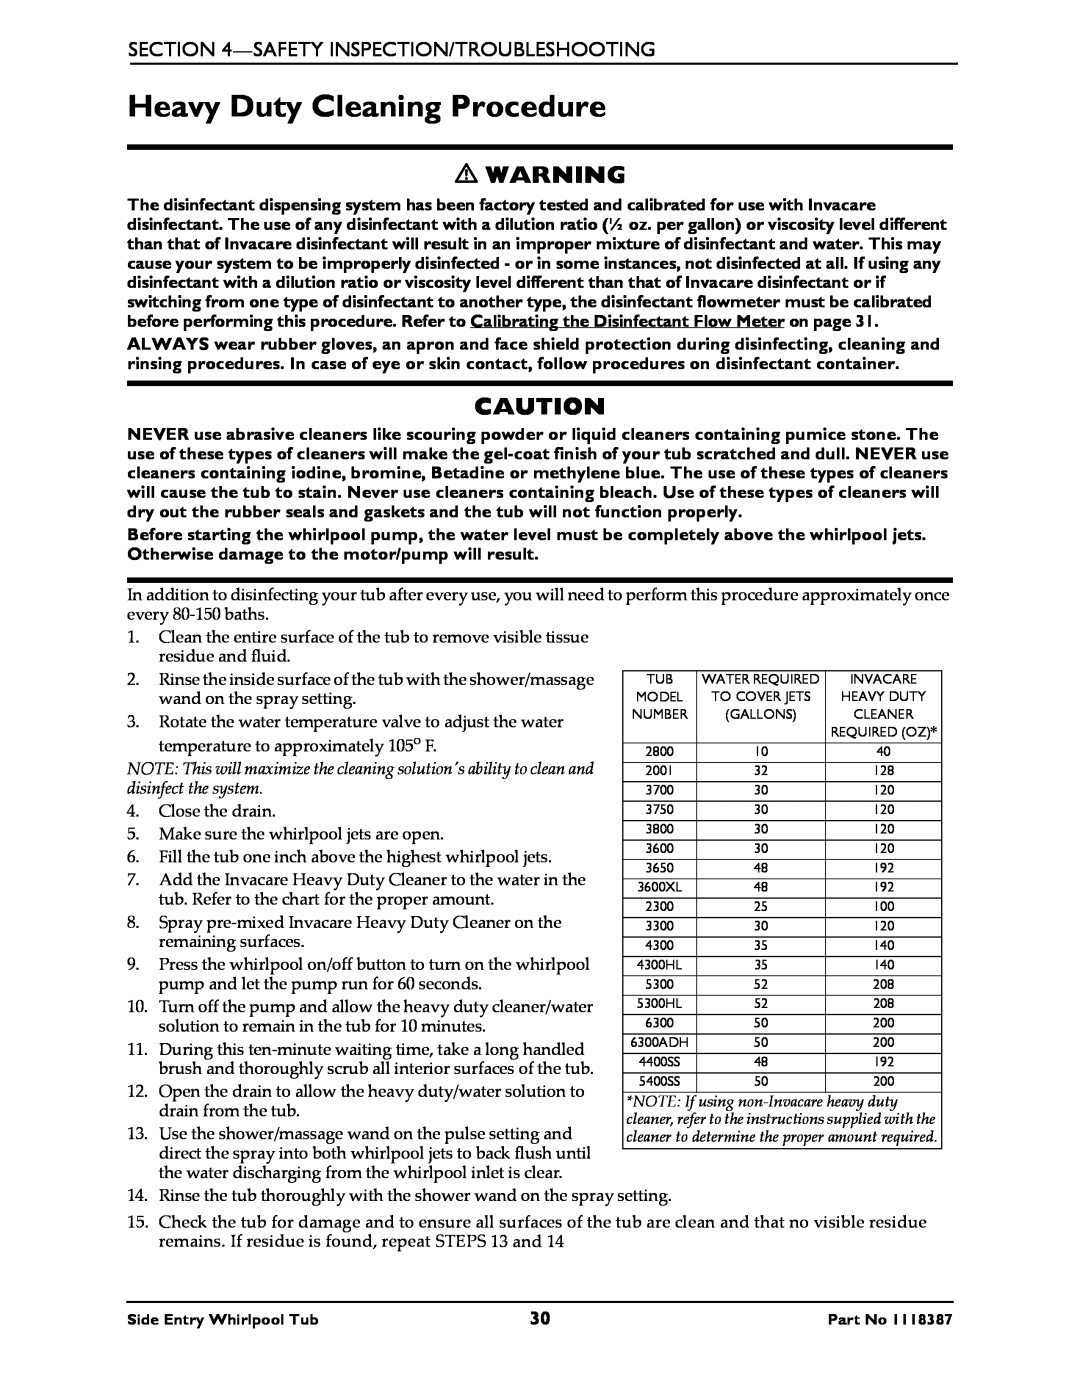 Invacare 3650 manual Heavy Duty Cleaning Procedure, Safety Inspection/Troubleshooting 